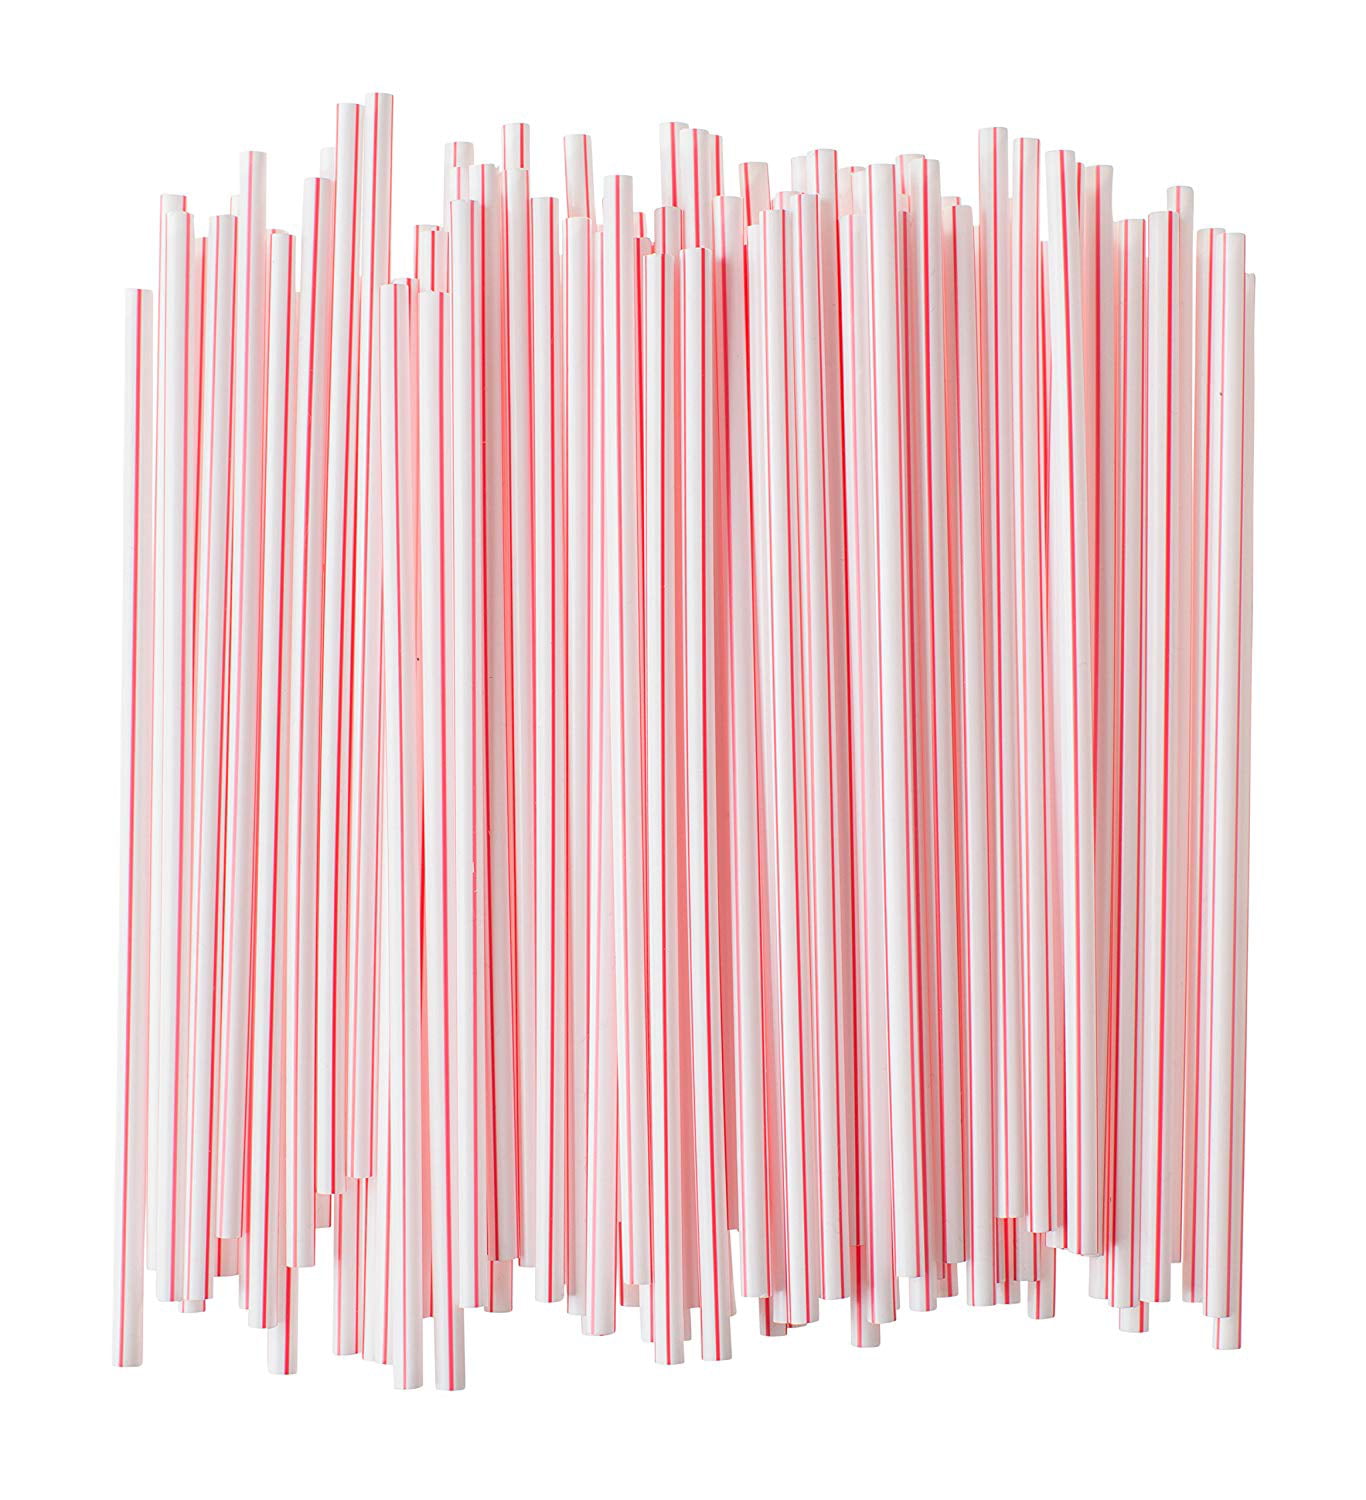 Plastic Small Straws, Stirrers, Milk Straws, Red and White Straws,  Individually Wrapped, Foodsafe PP Plastic, Small Diameter, 5 3/4 Inches  Long